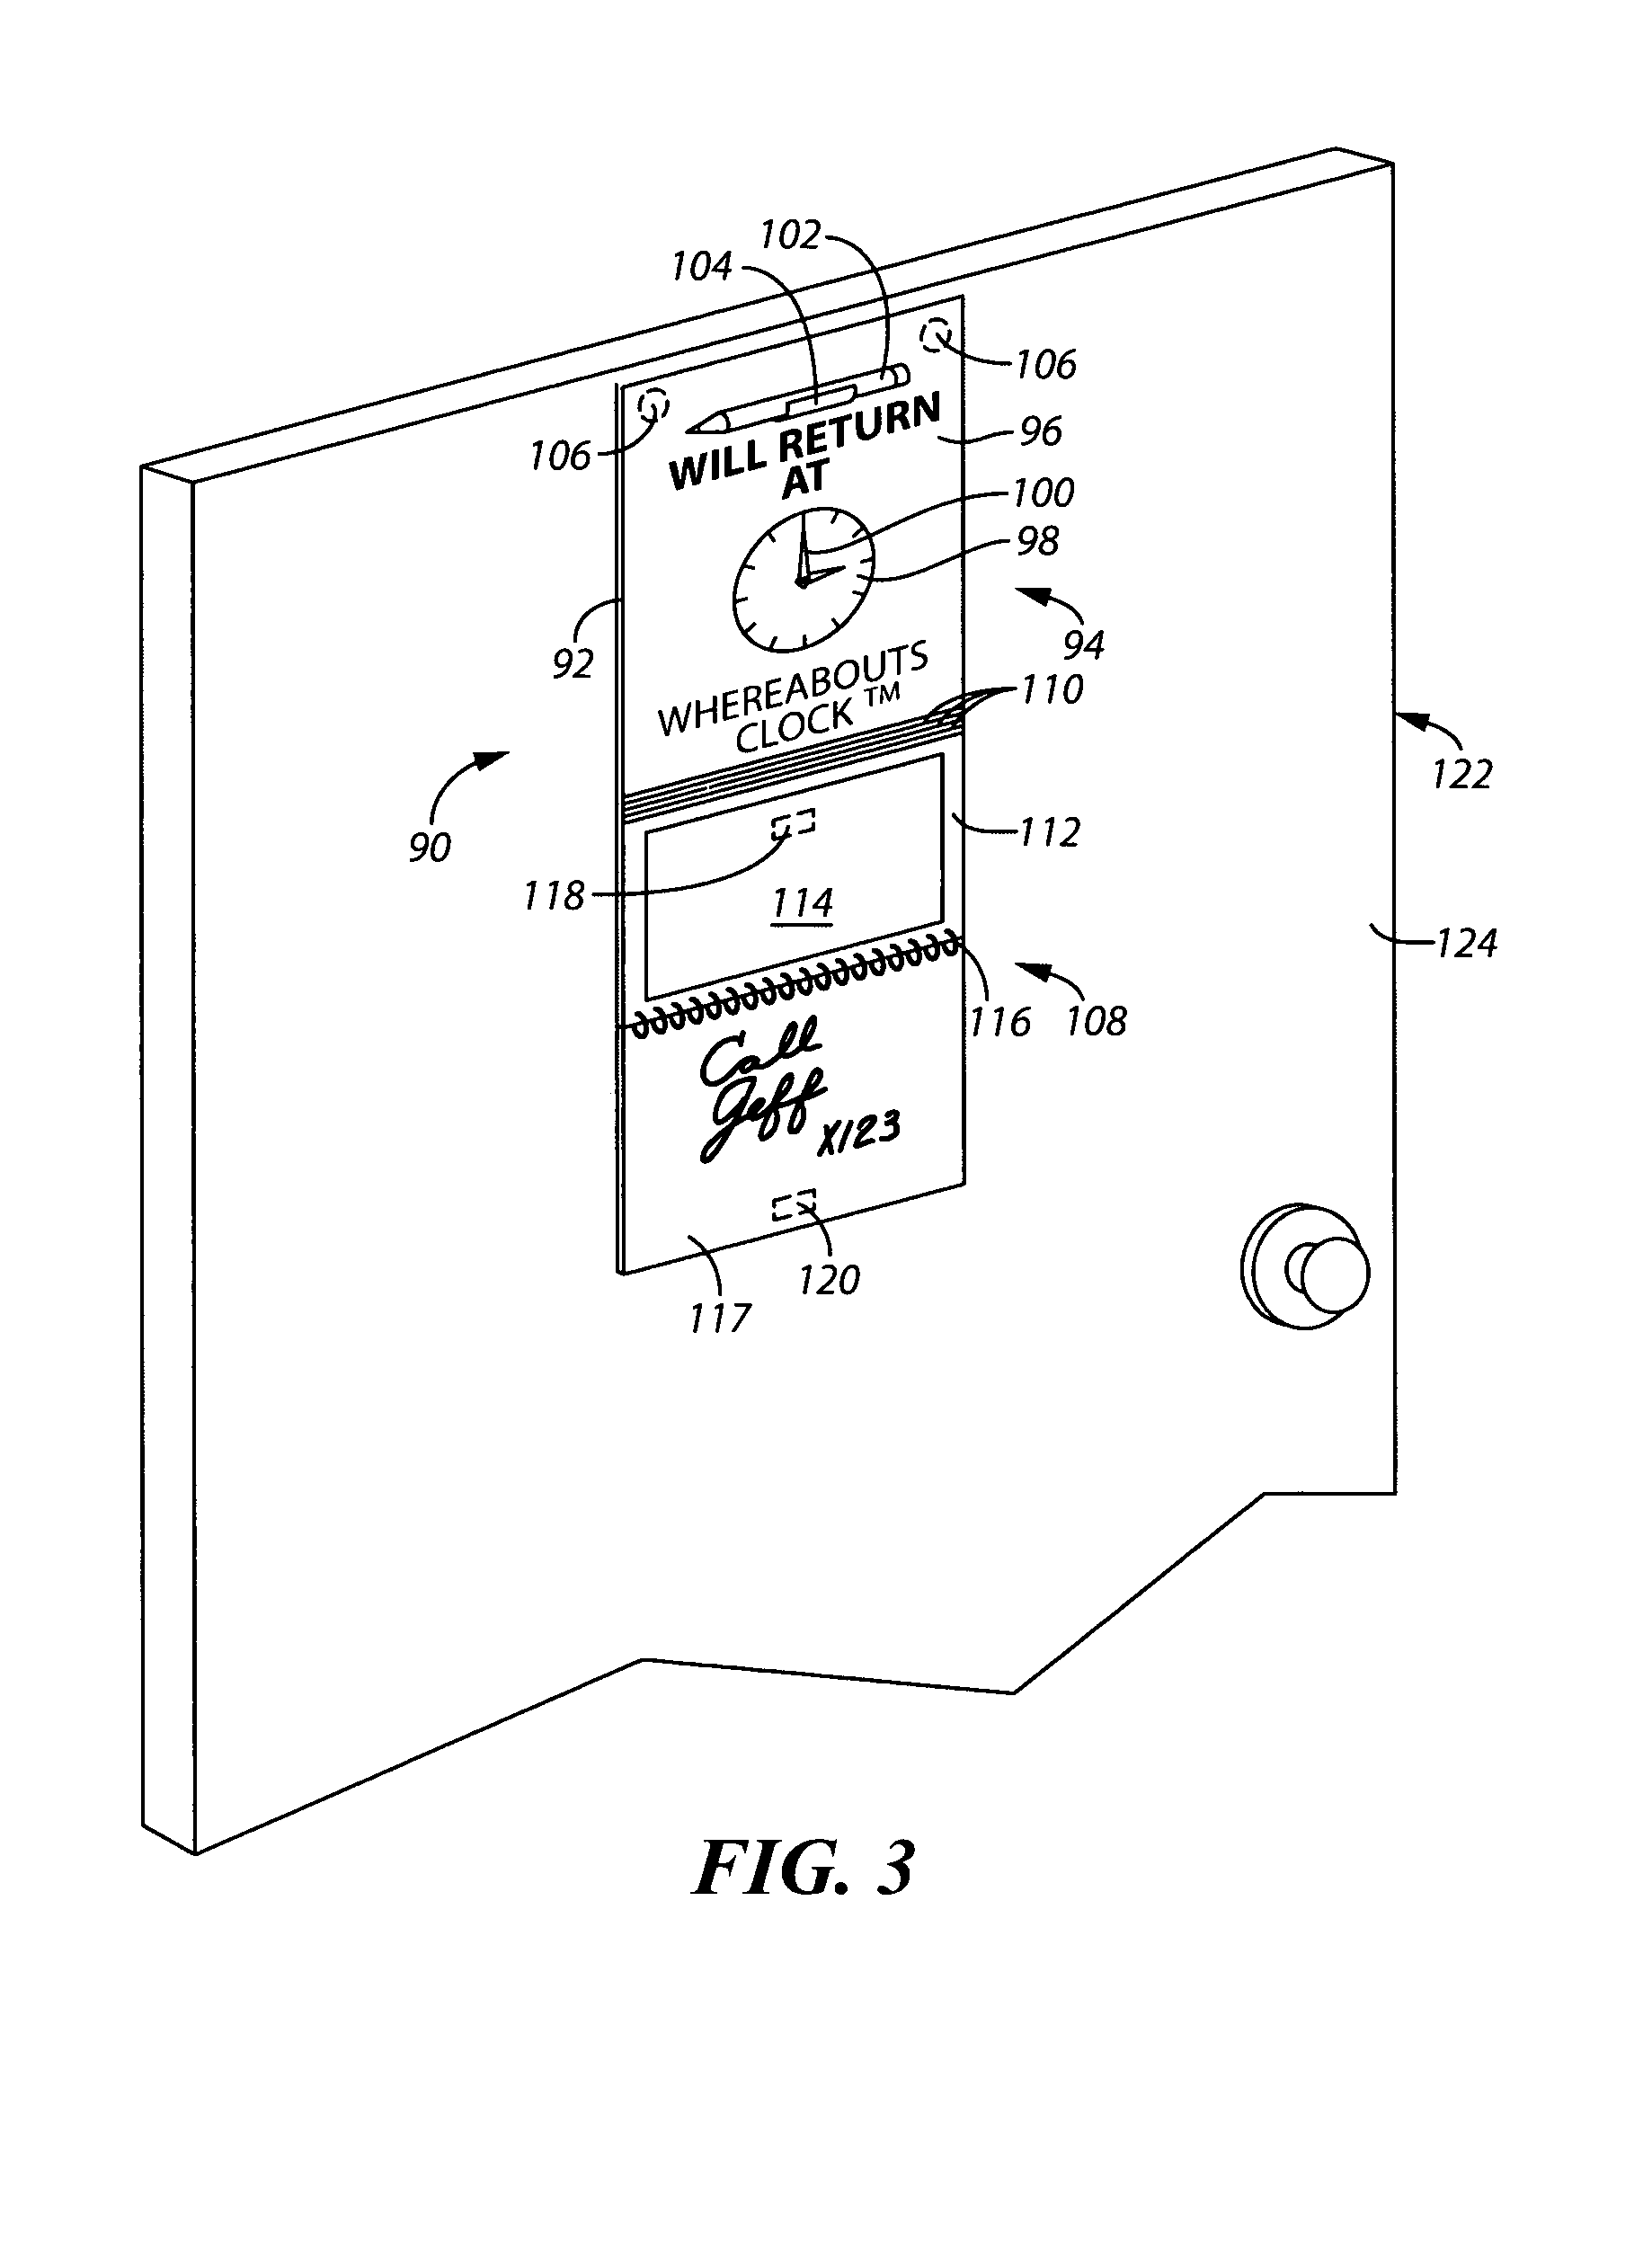 Display apparatus for visually communicating information pertaining to a worker's whereabouts